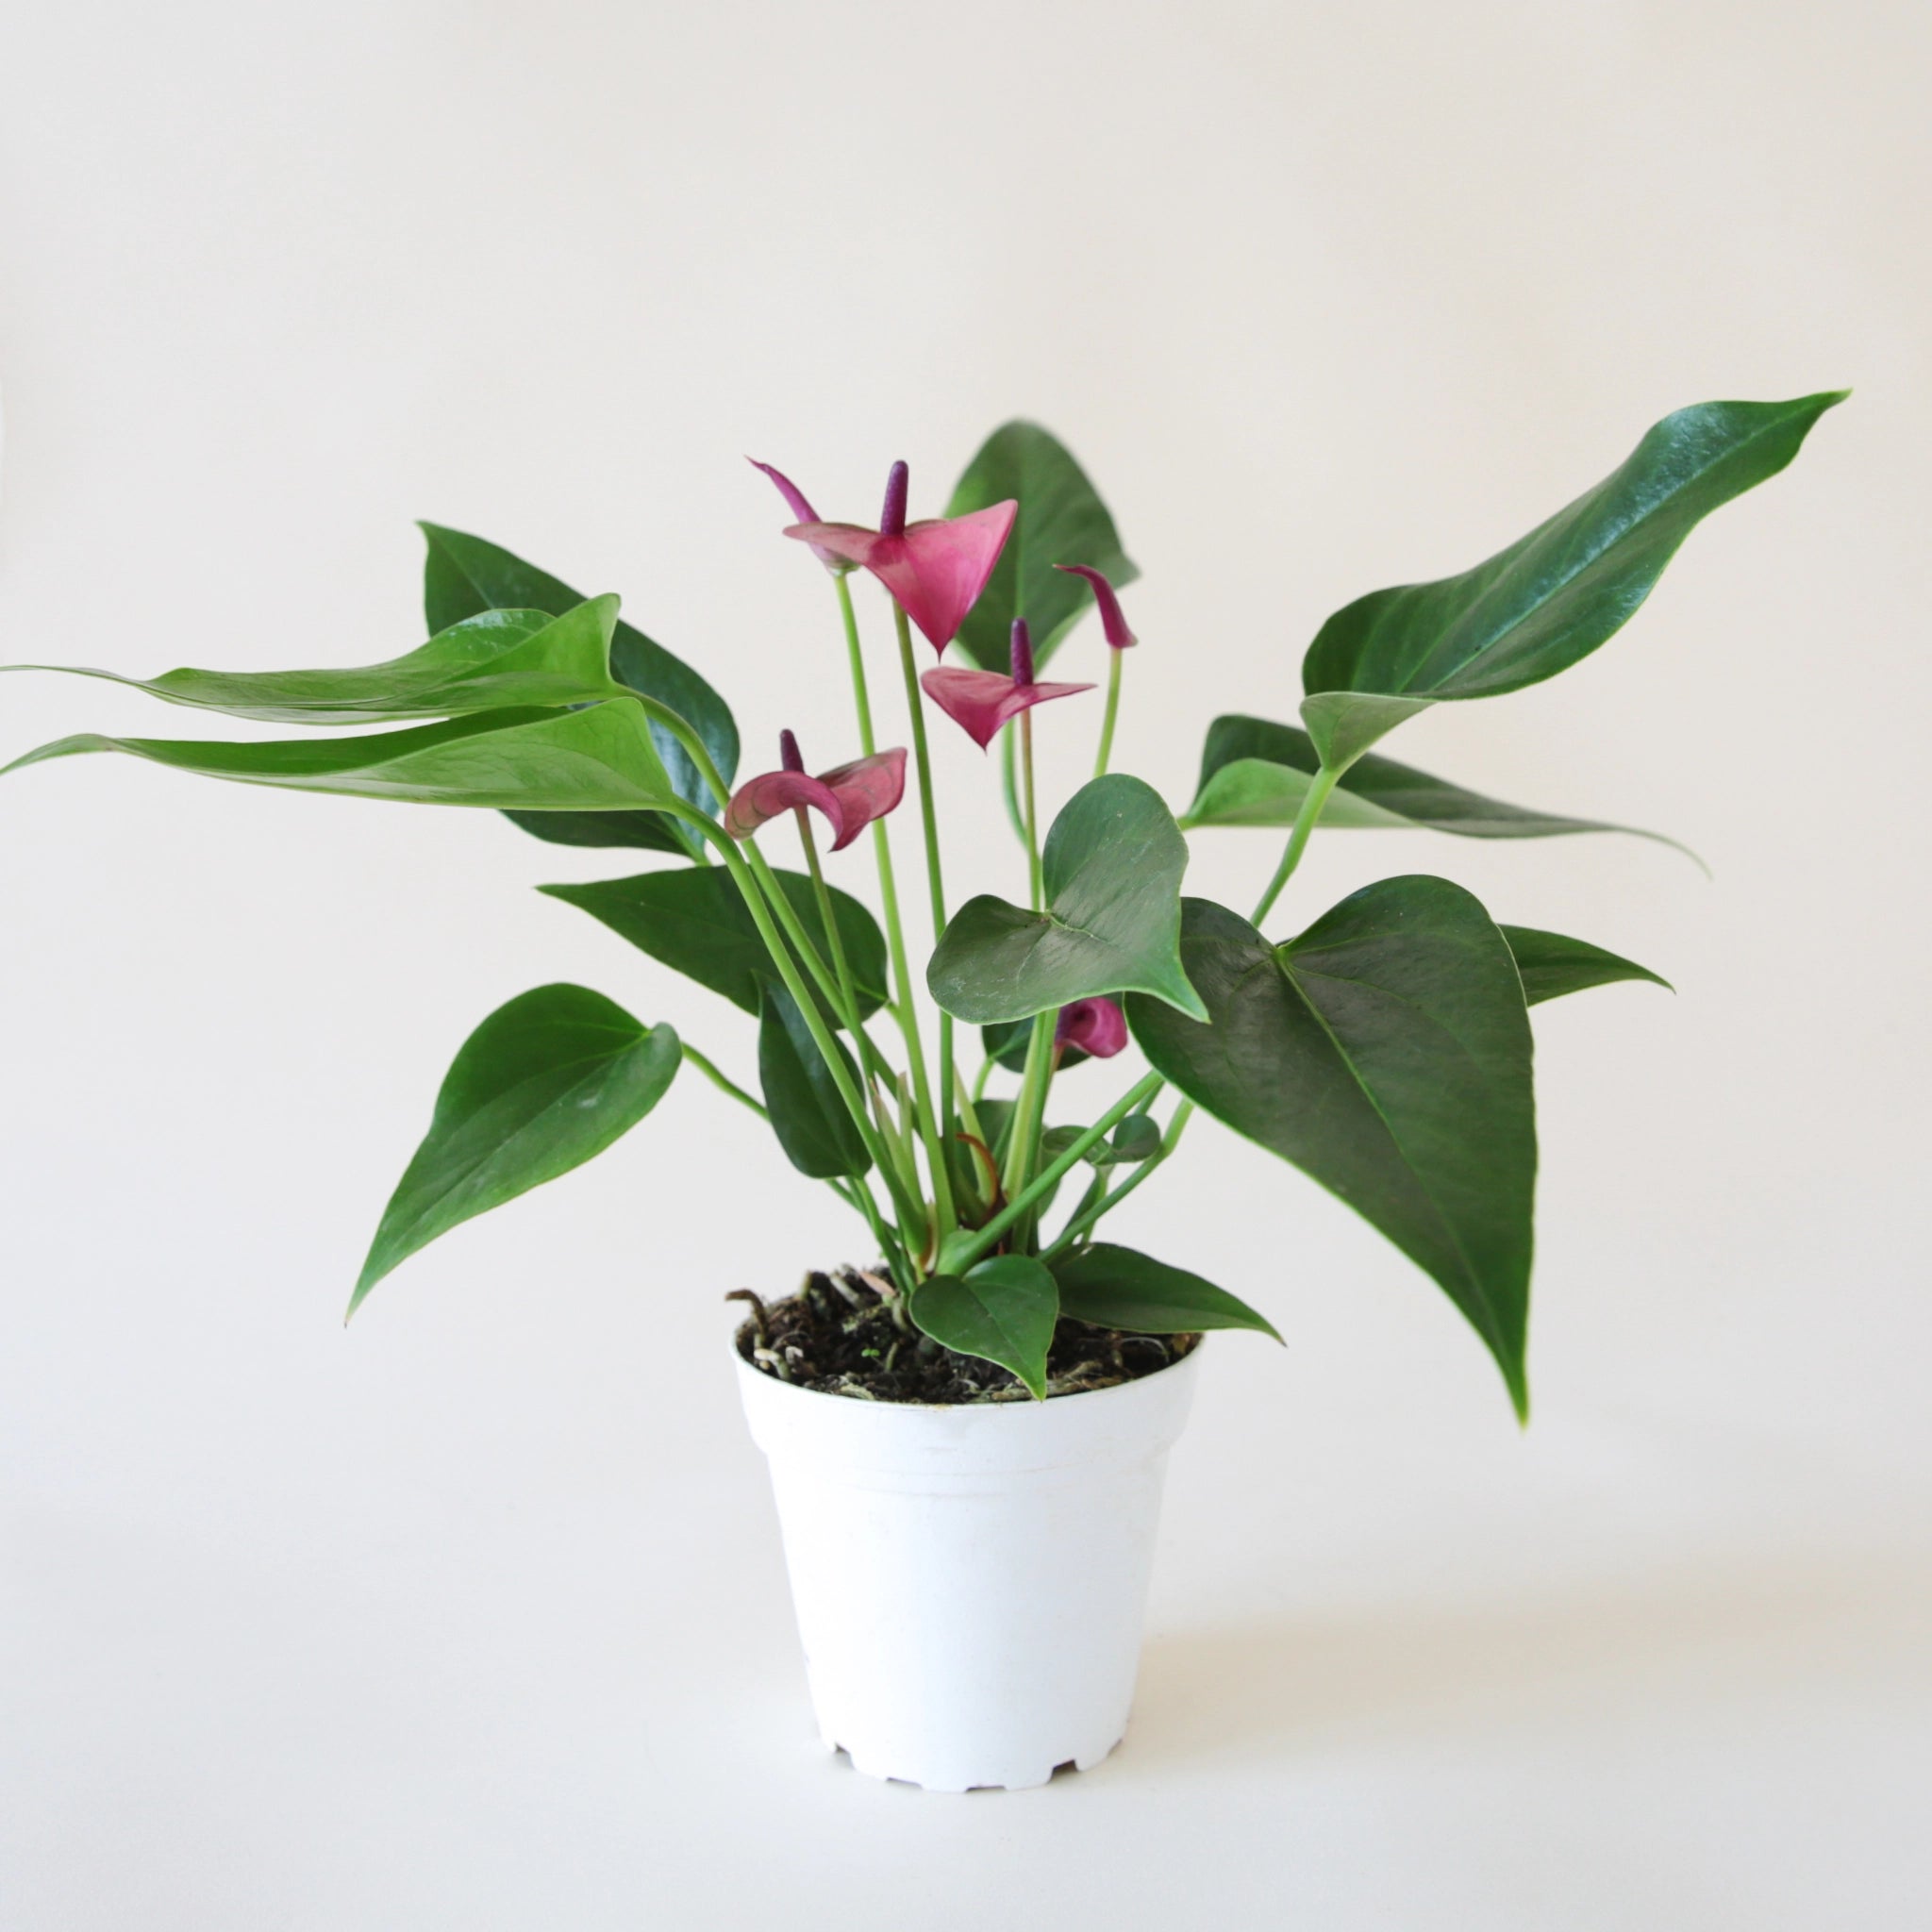 Anthurium &#39;Zizou&#39; Purple planted in a round white pot. Anthurium has dark green spade shaped leaves and tall flat grape colored flower petals and dark purple stamen.